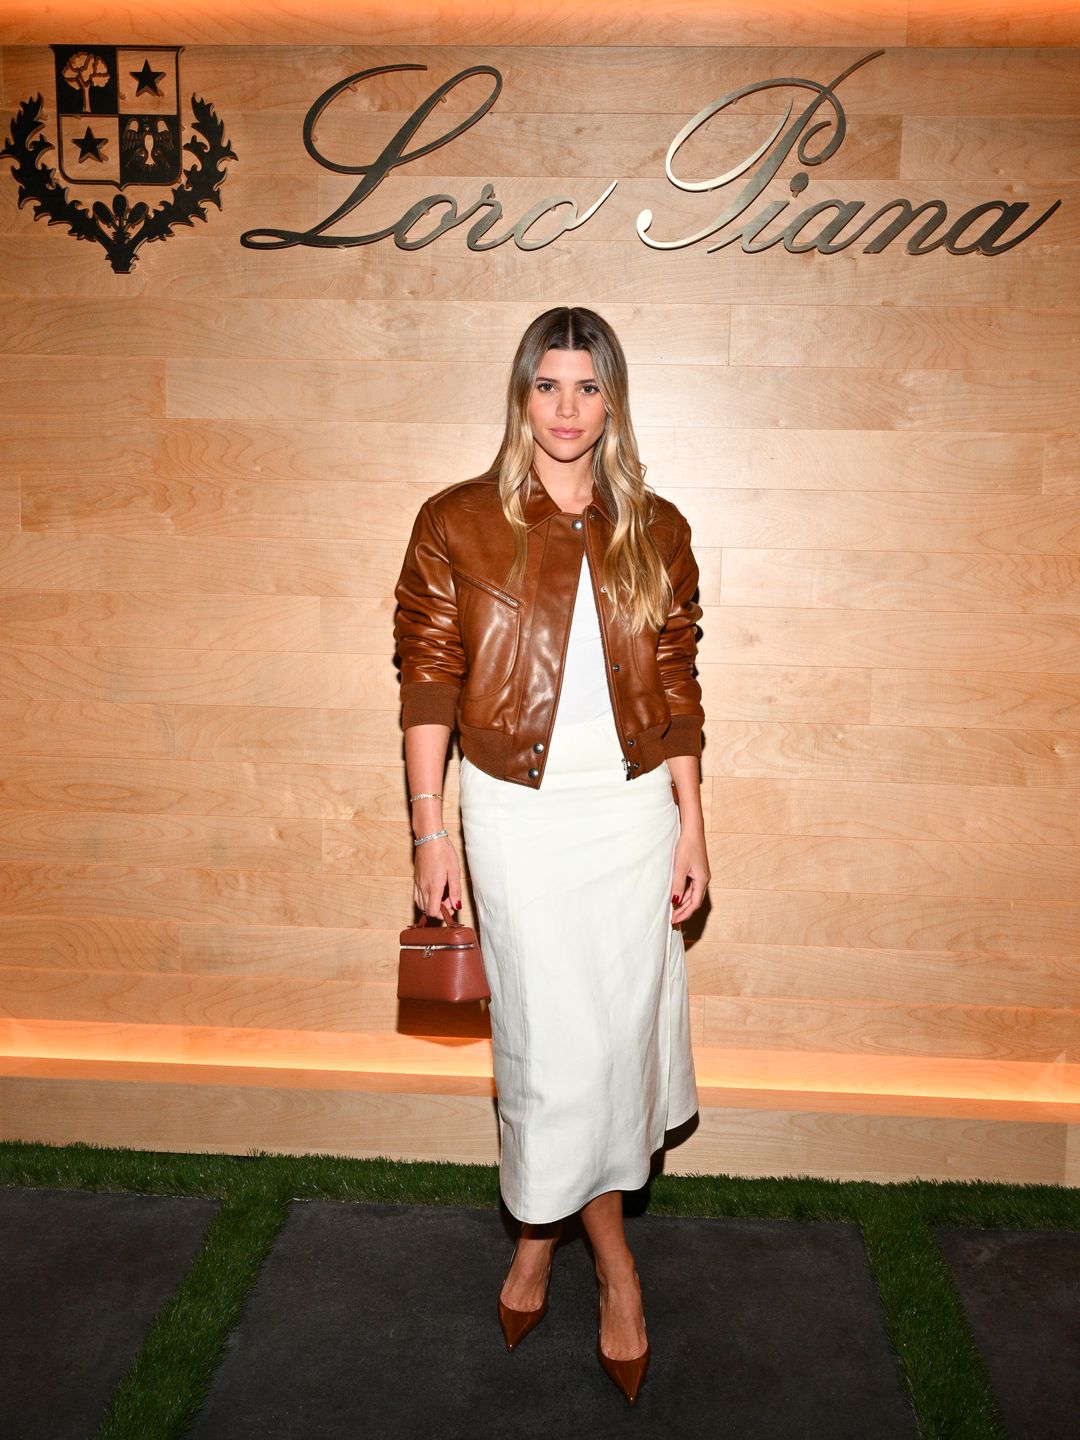 Sofia Richie at the Loro Piana Cocooning Collection Launch held on October 10, 2023 in Malibu, California. (Photo by Michael Buckner/WWD via Getty Images)